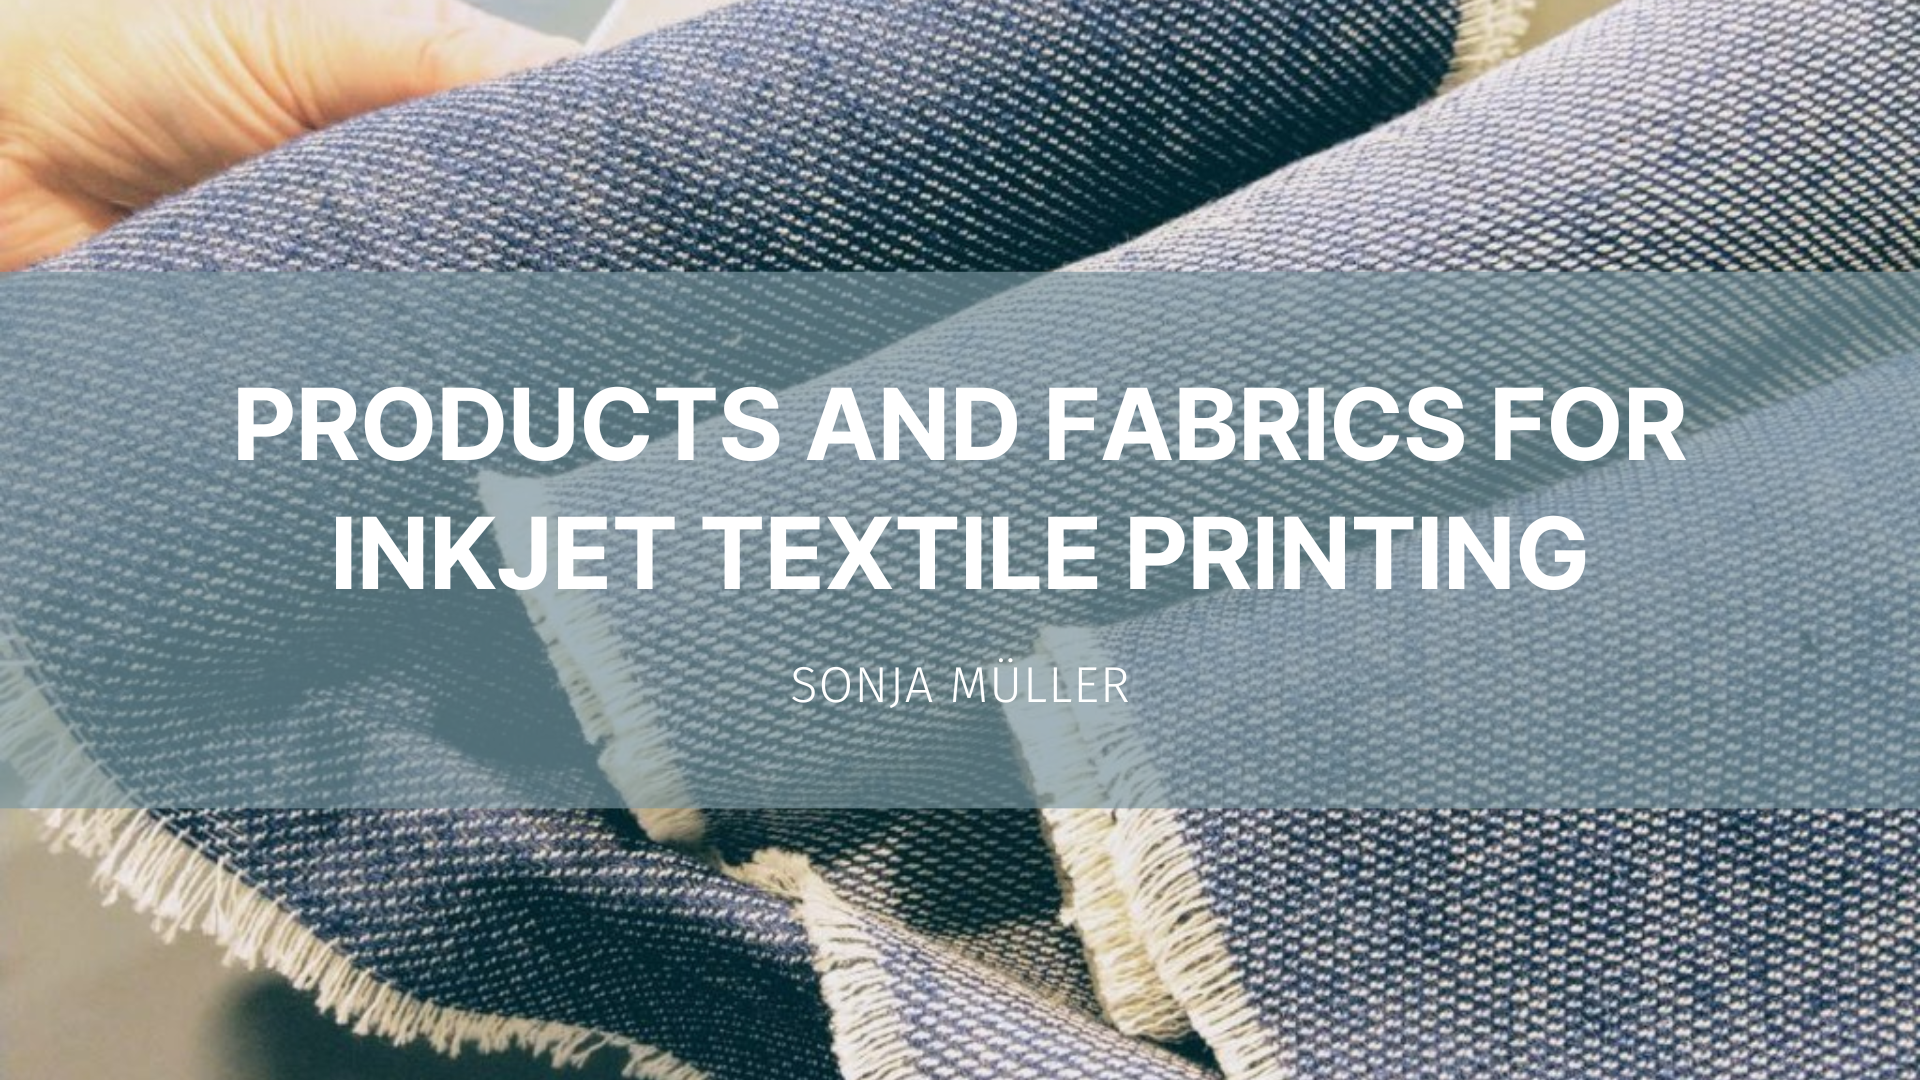 Featured image for “Products and fabrics for inkjet textile printing”